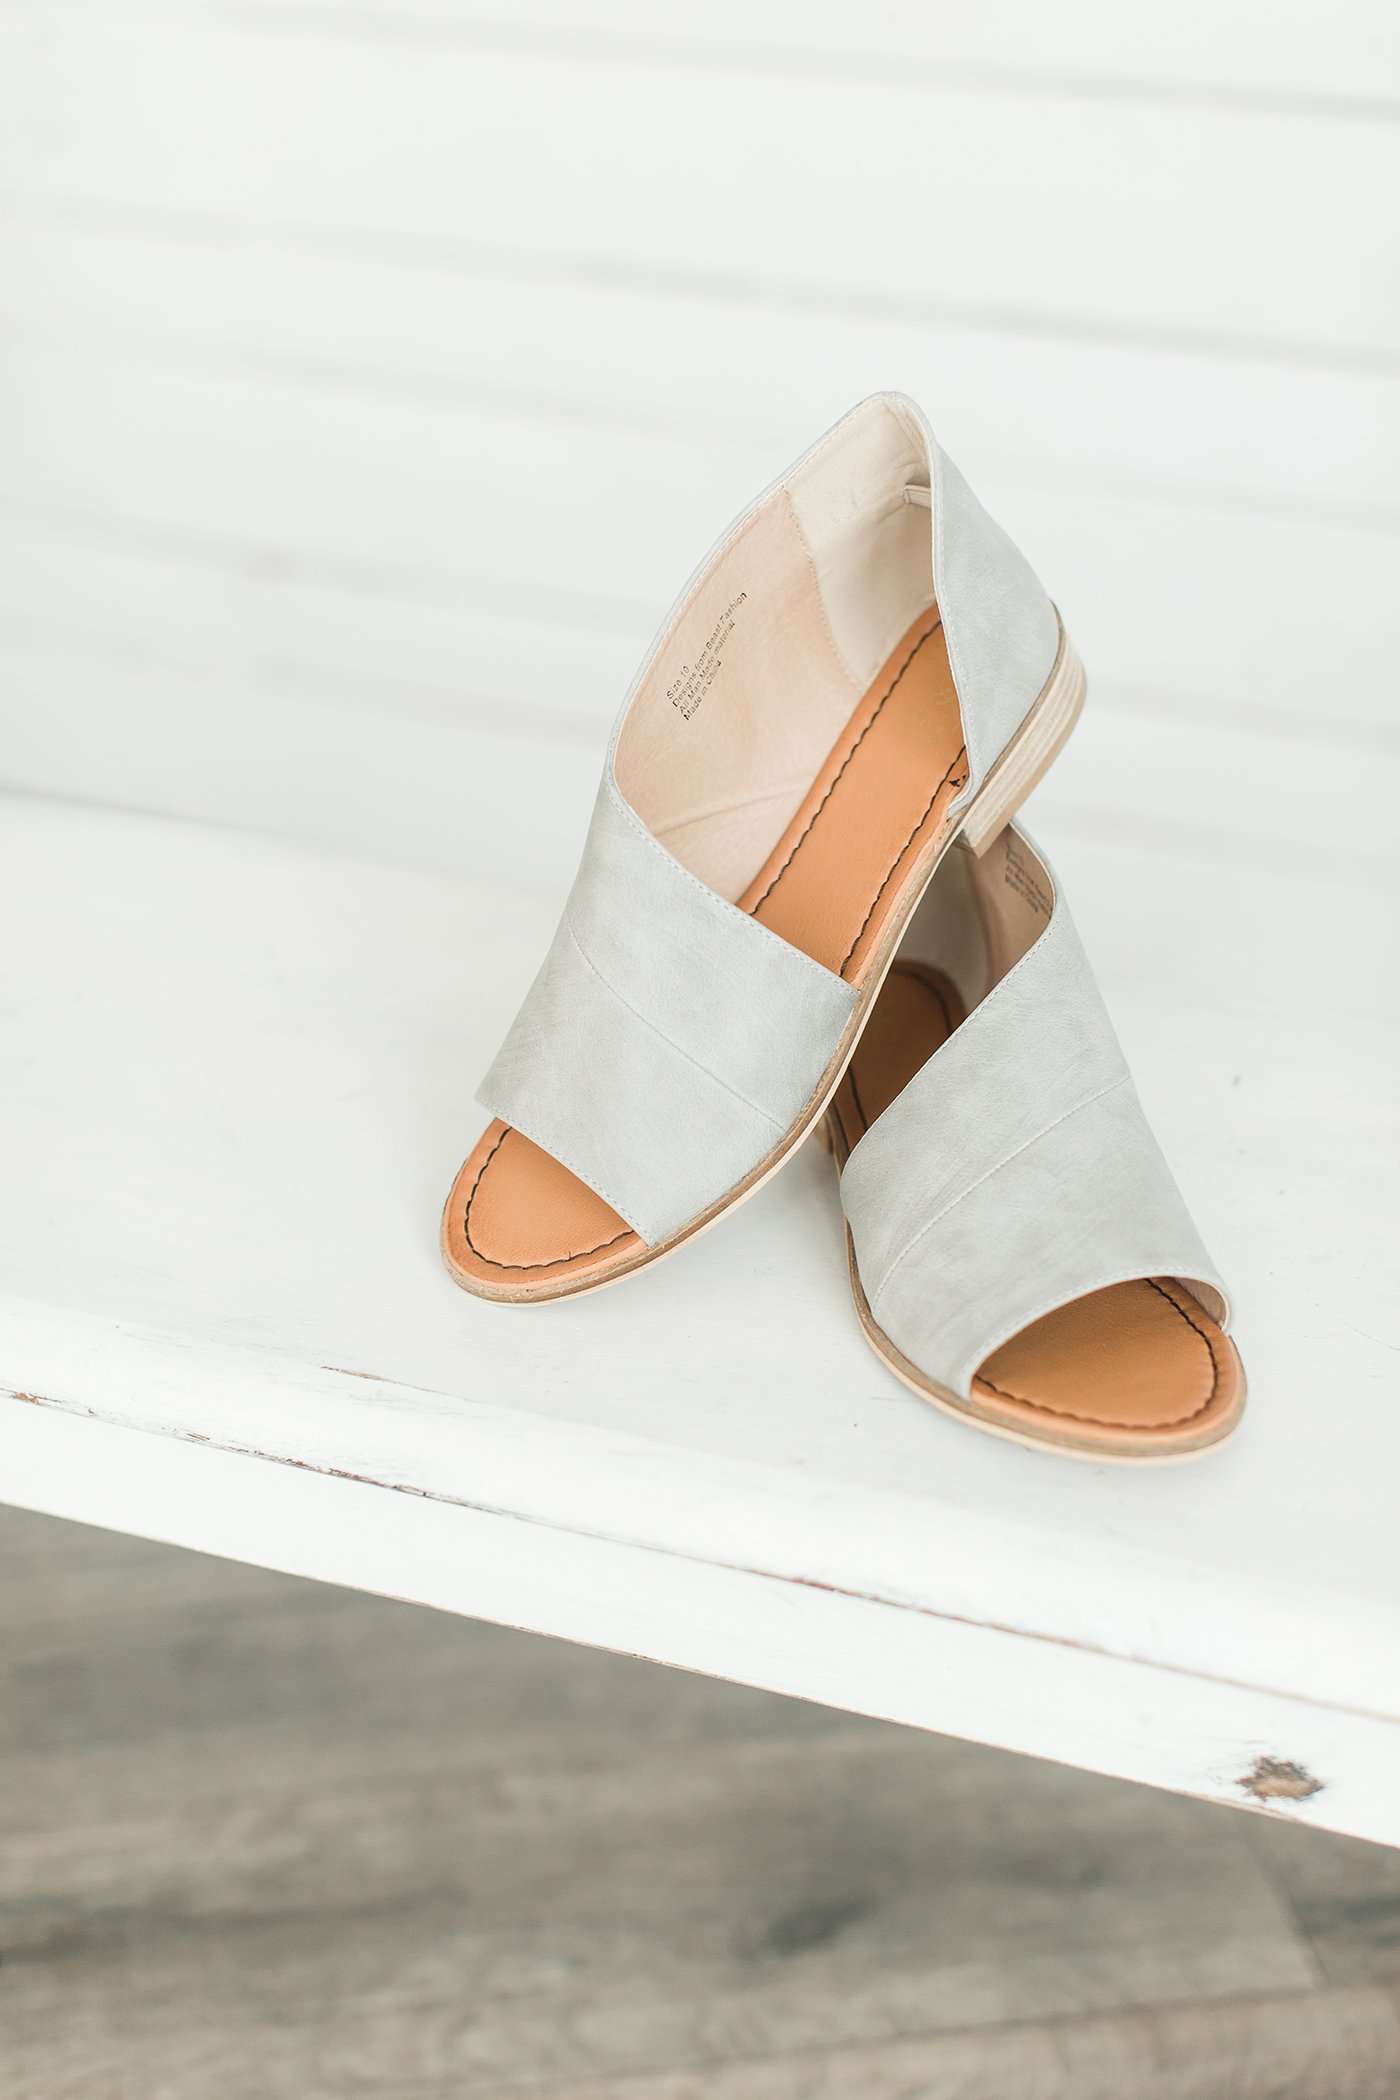 Grey or cognac sandal with enclosed heel, open toe and large leather wrap around strap.